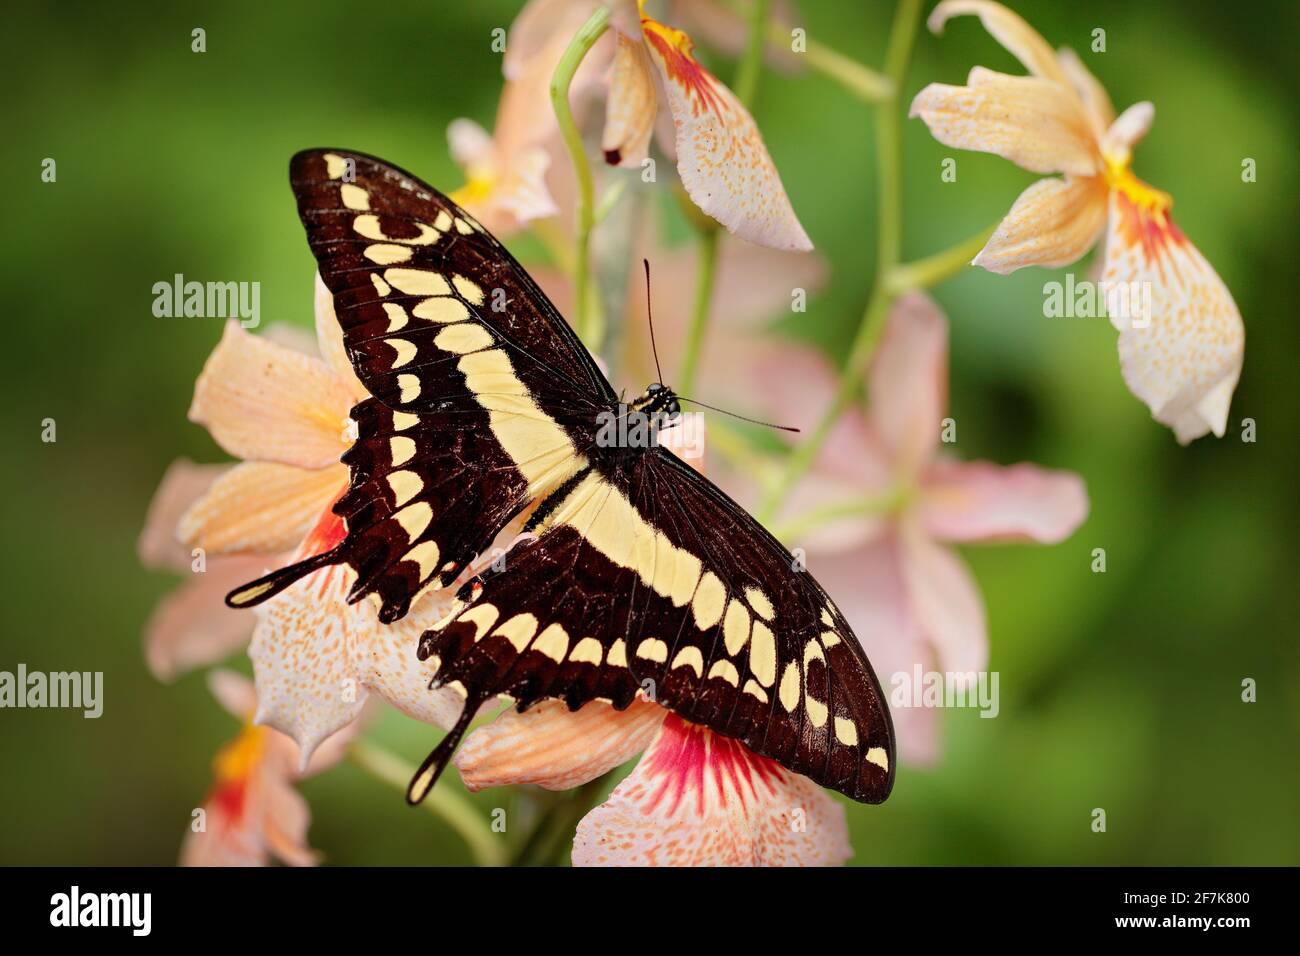 Butterfly on the white orchid. Insect in green forest vegetation. Giant Swallow Tail, Papilio thoas nealces, beautiful butterfly from Mexico sitting o Stock Photo